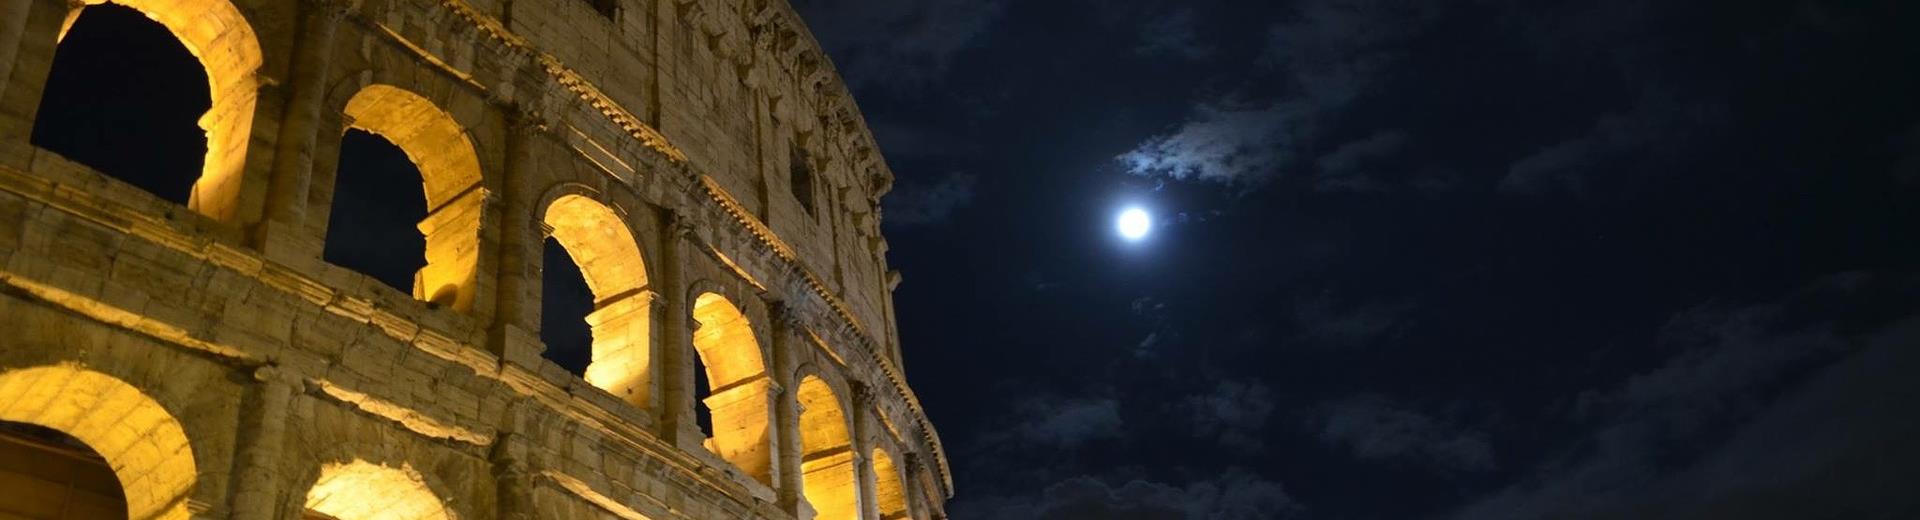 Find upcoming events in Rome!